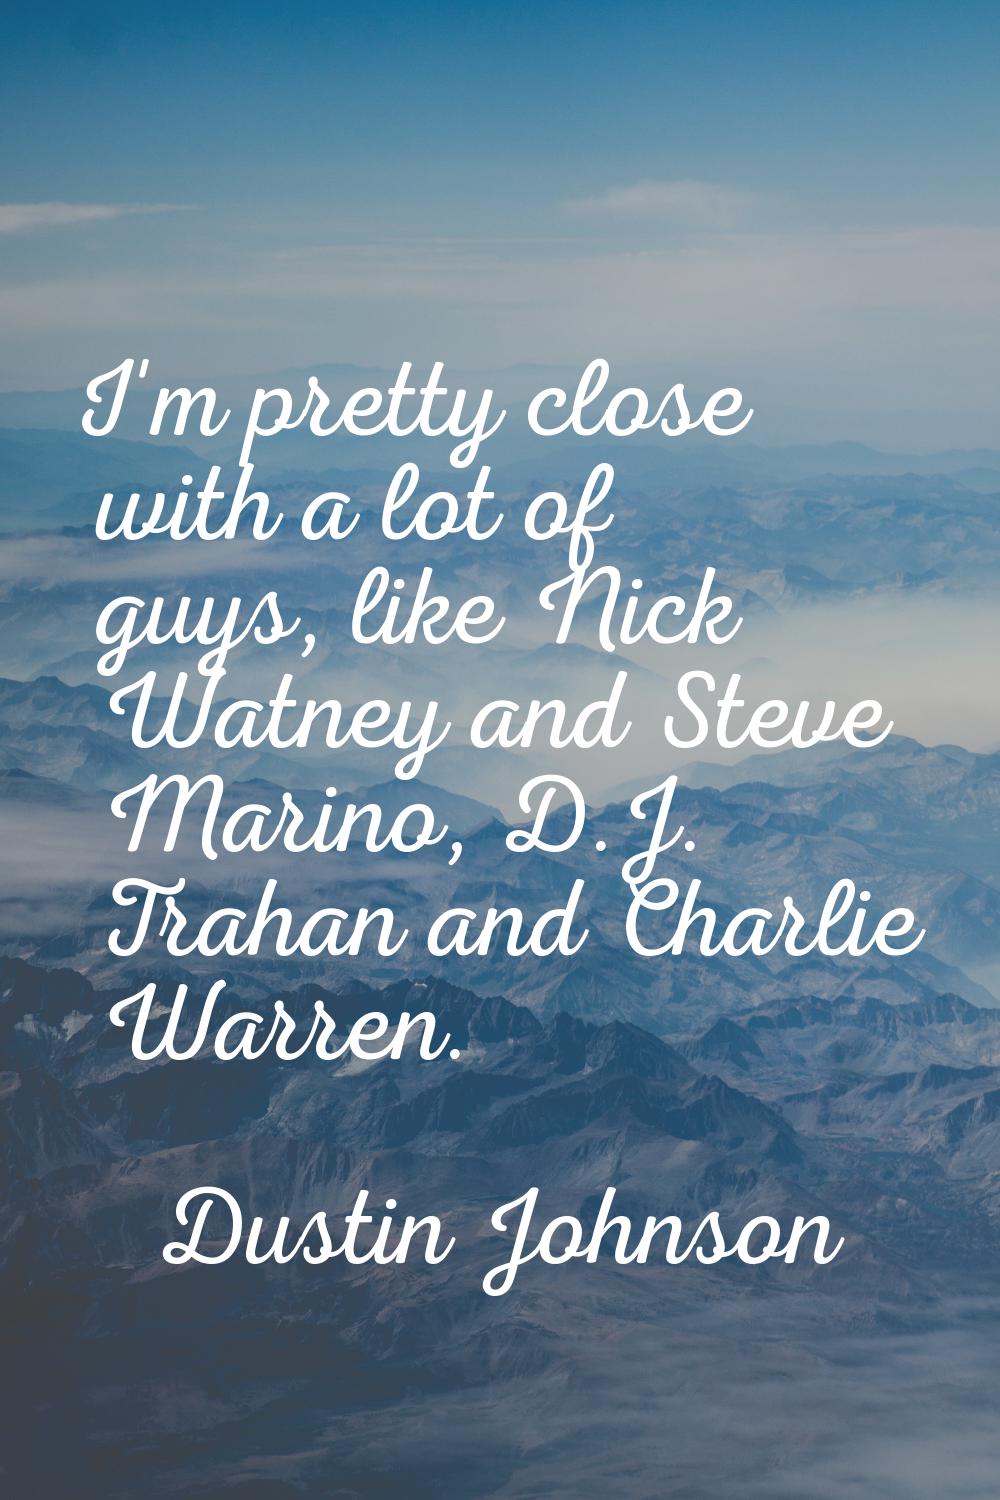 I'm pretty close with a lot of guys, like Nick Watney and Steve Marino, D.J. Trahan and Charlie War